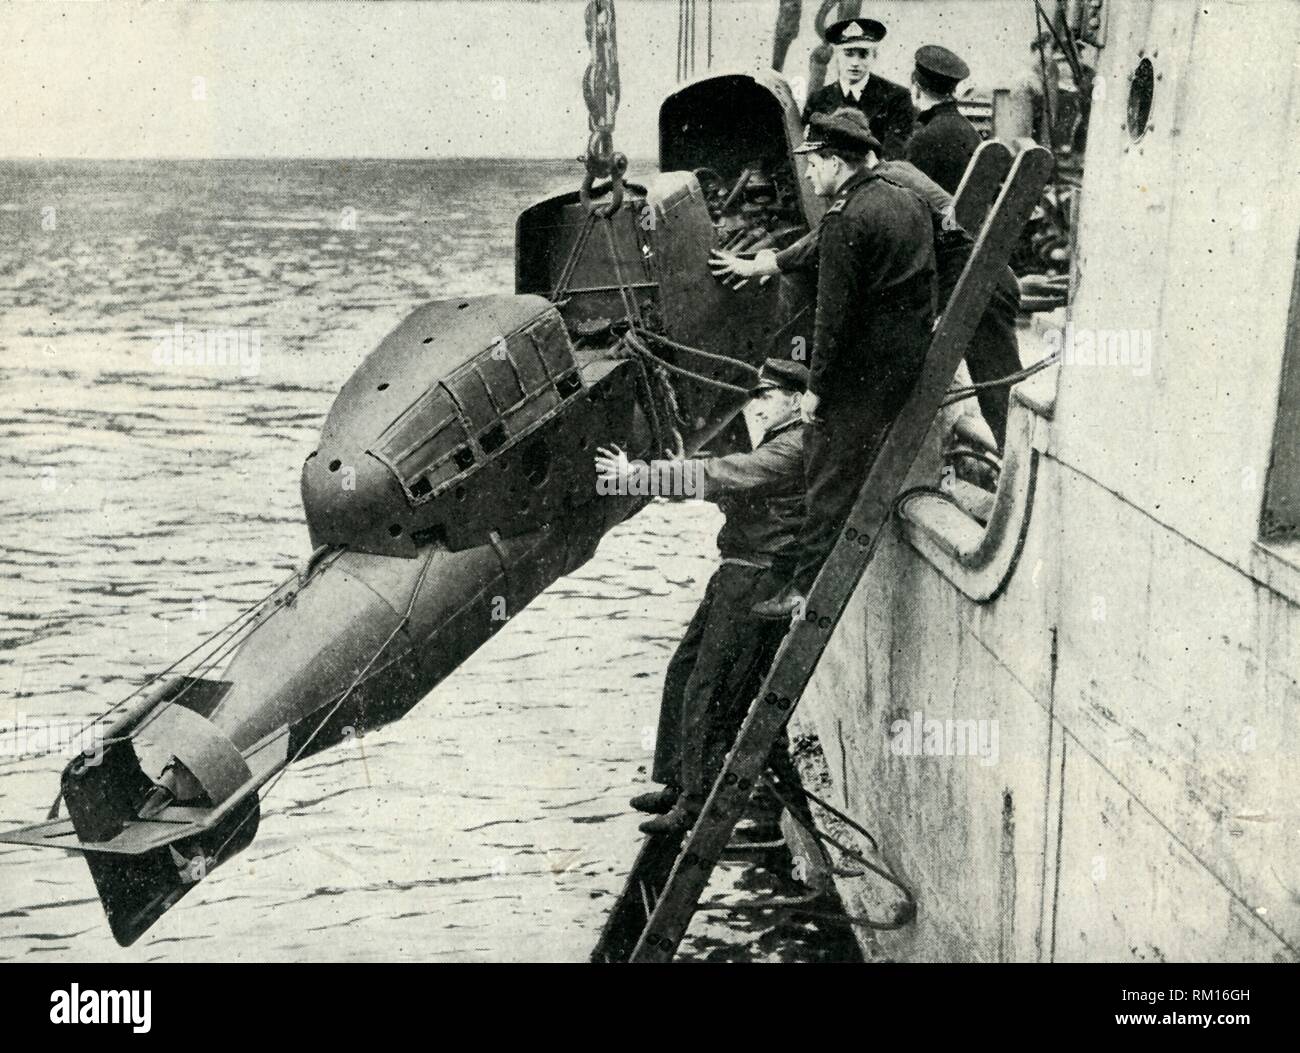 Hoisting a Chariot manned torpedo on board a ship, World War II, 1945. Creator: Unknown. Stock Photo